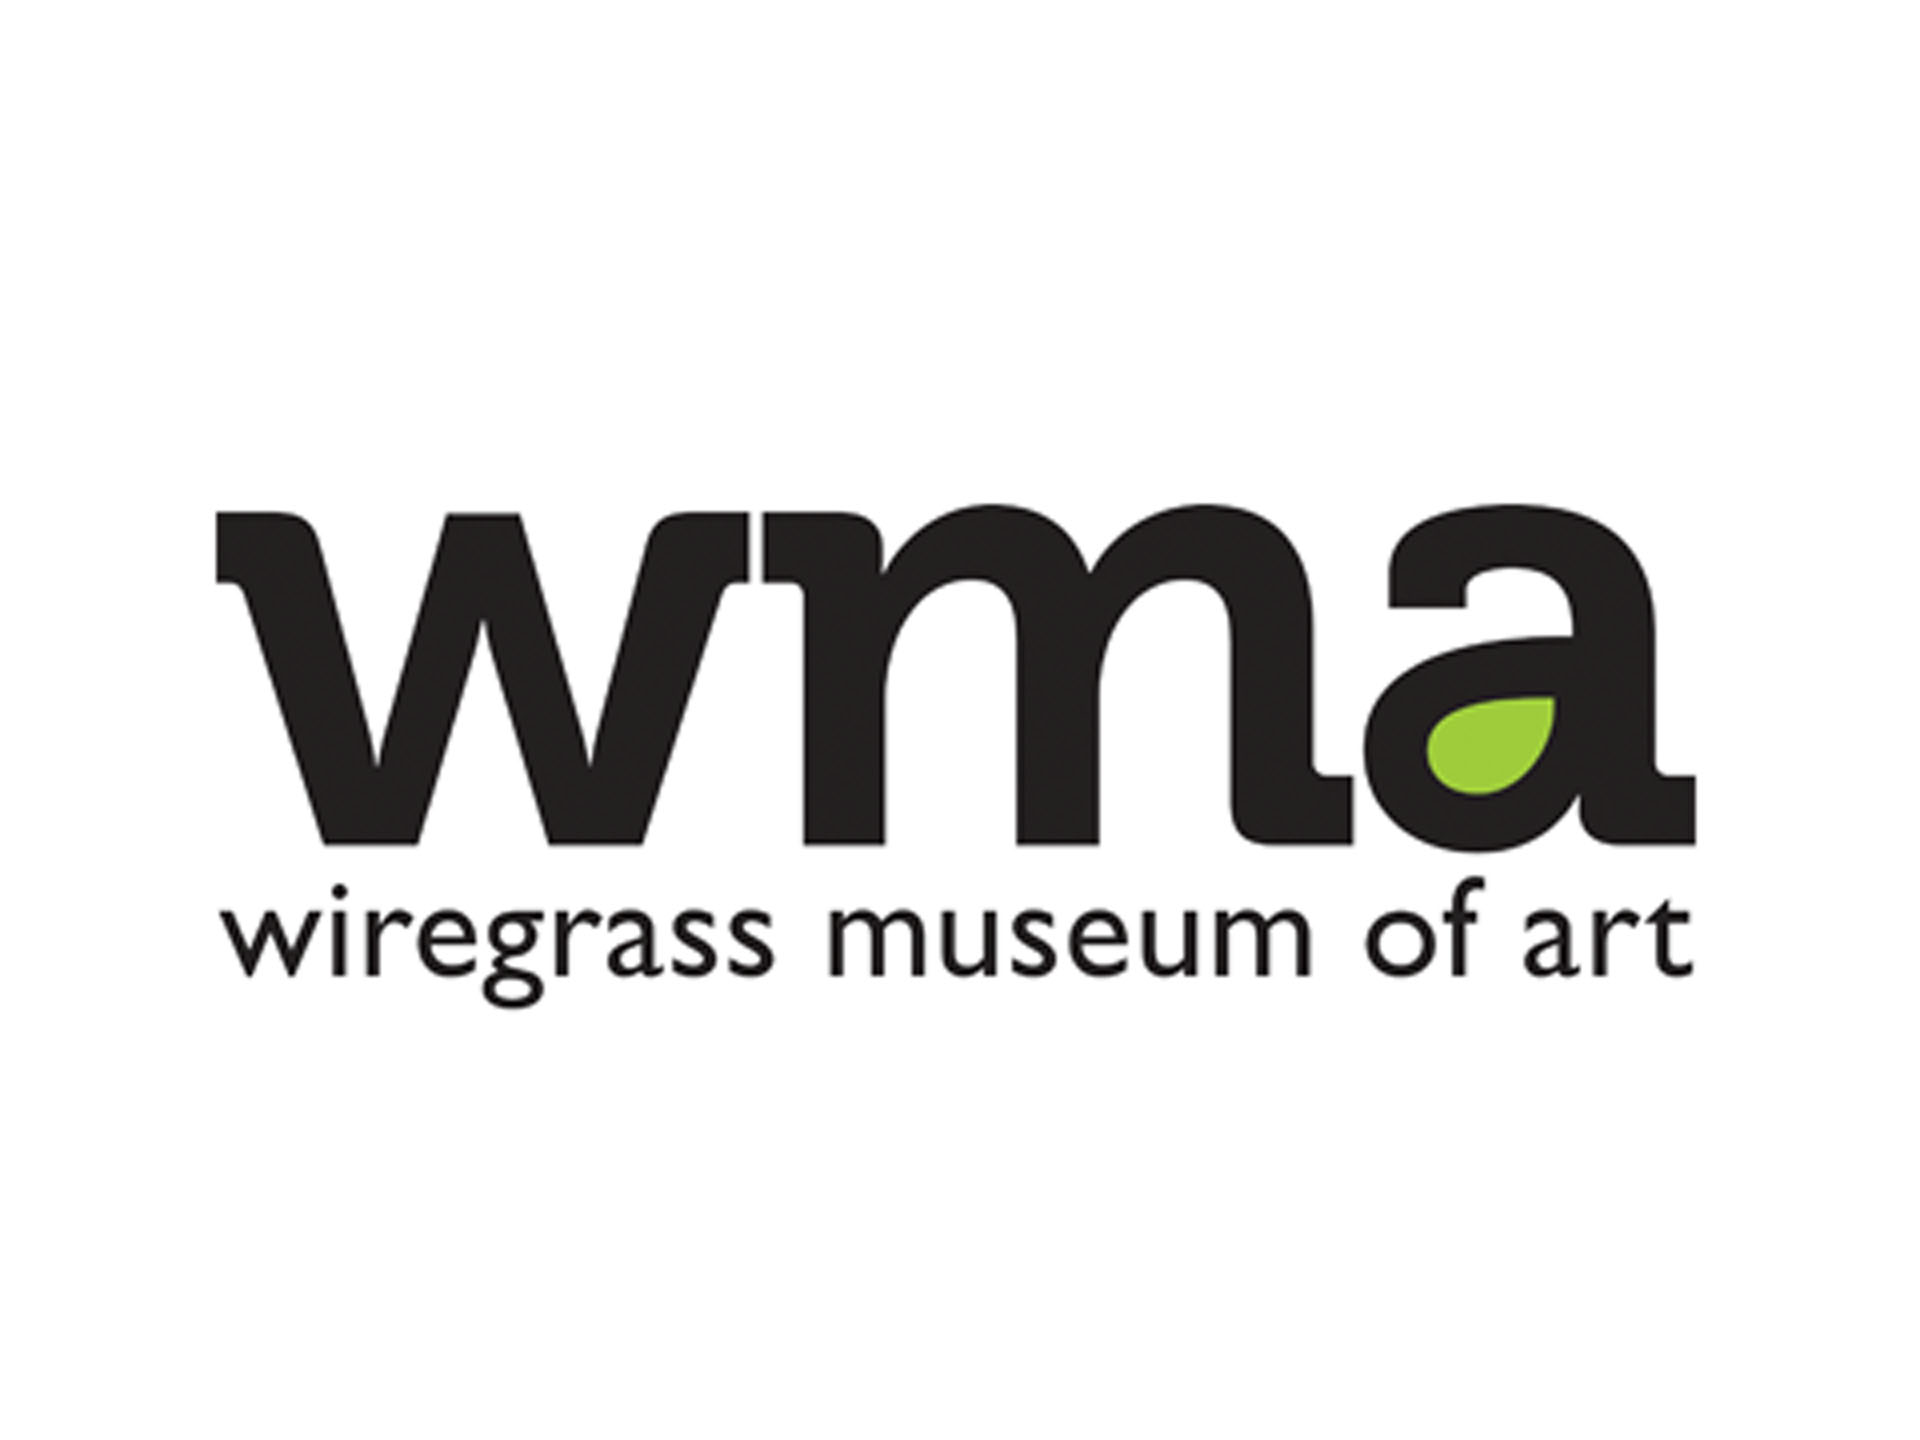 Alabama State Council on the Arts awards $10,000 to WMA